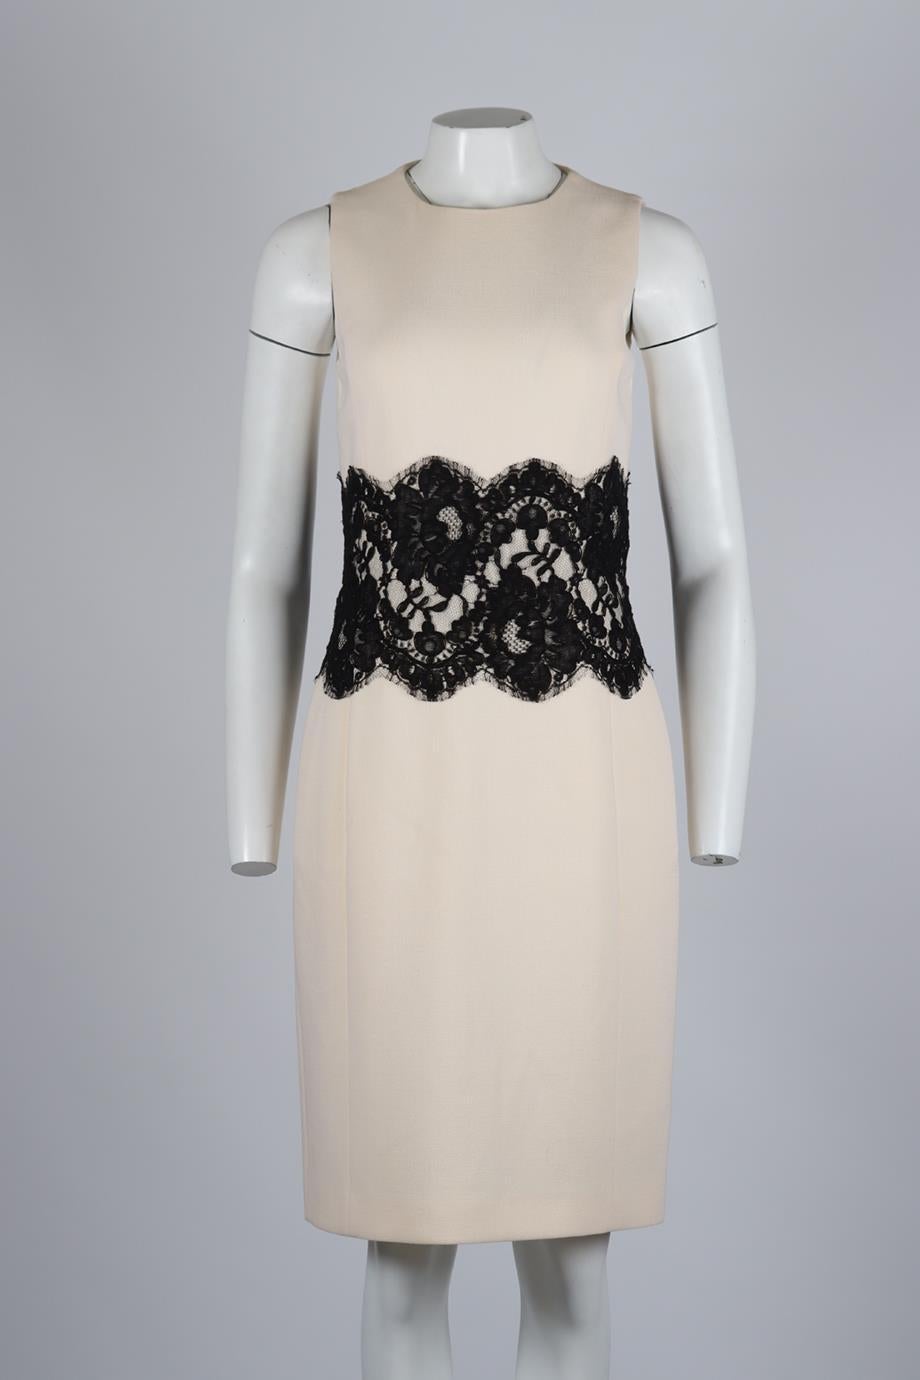 Michael Kors Lace Paneled Wool Blend Dress. Cream and black. Sleeveless. Crewneck. Zip fastening - Back. 99% Wool, 1% spandex; lining: 56% rayon, 44% polyester. US 8 (UK 12, FR 40, IT 44). Bust: 35 in. Waist: 30 in. Hips: 40 in. Length: 40 in.